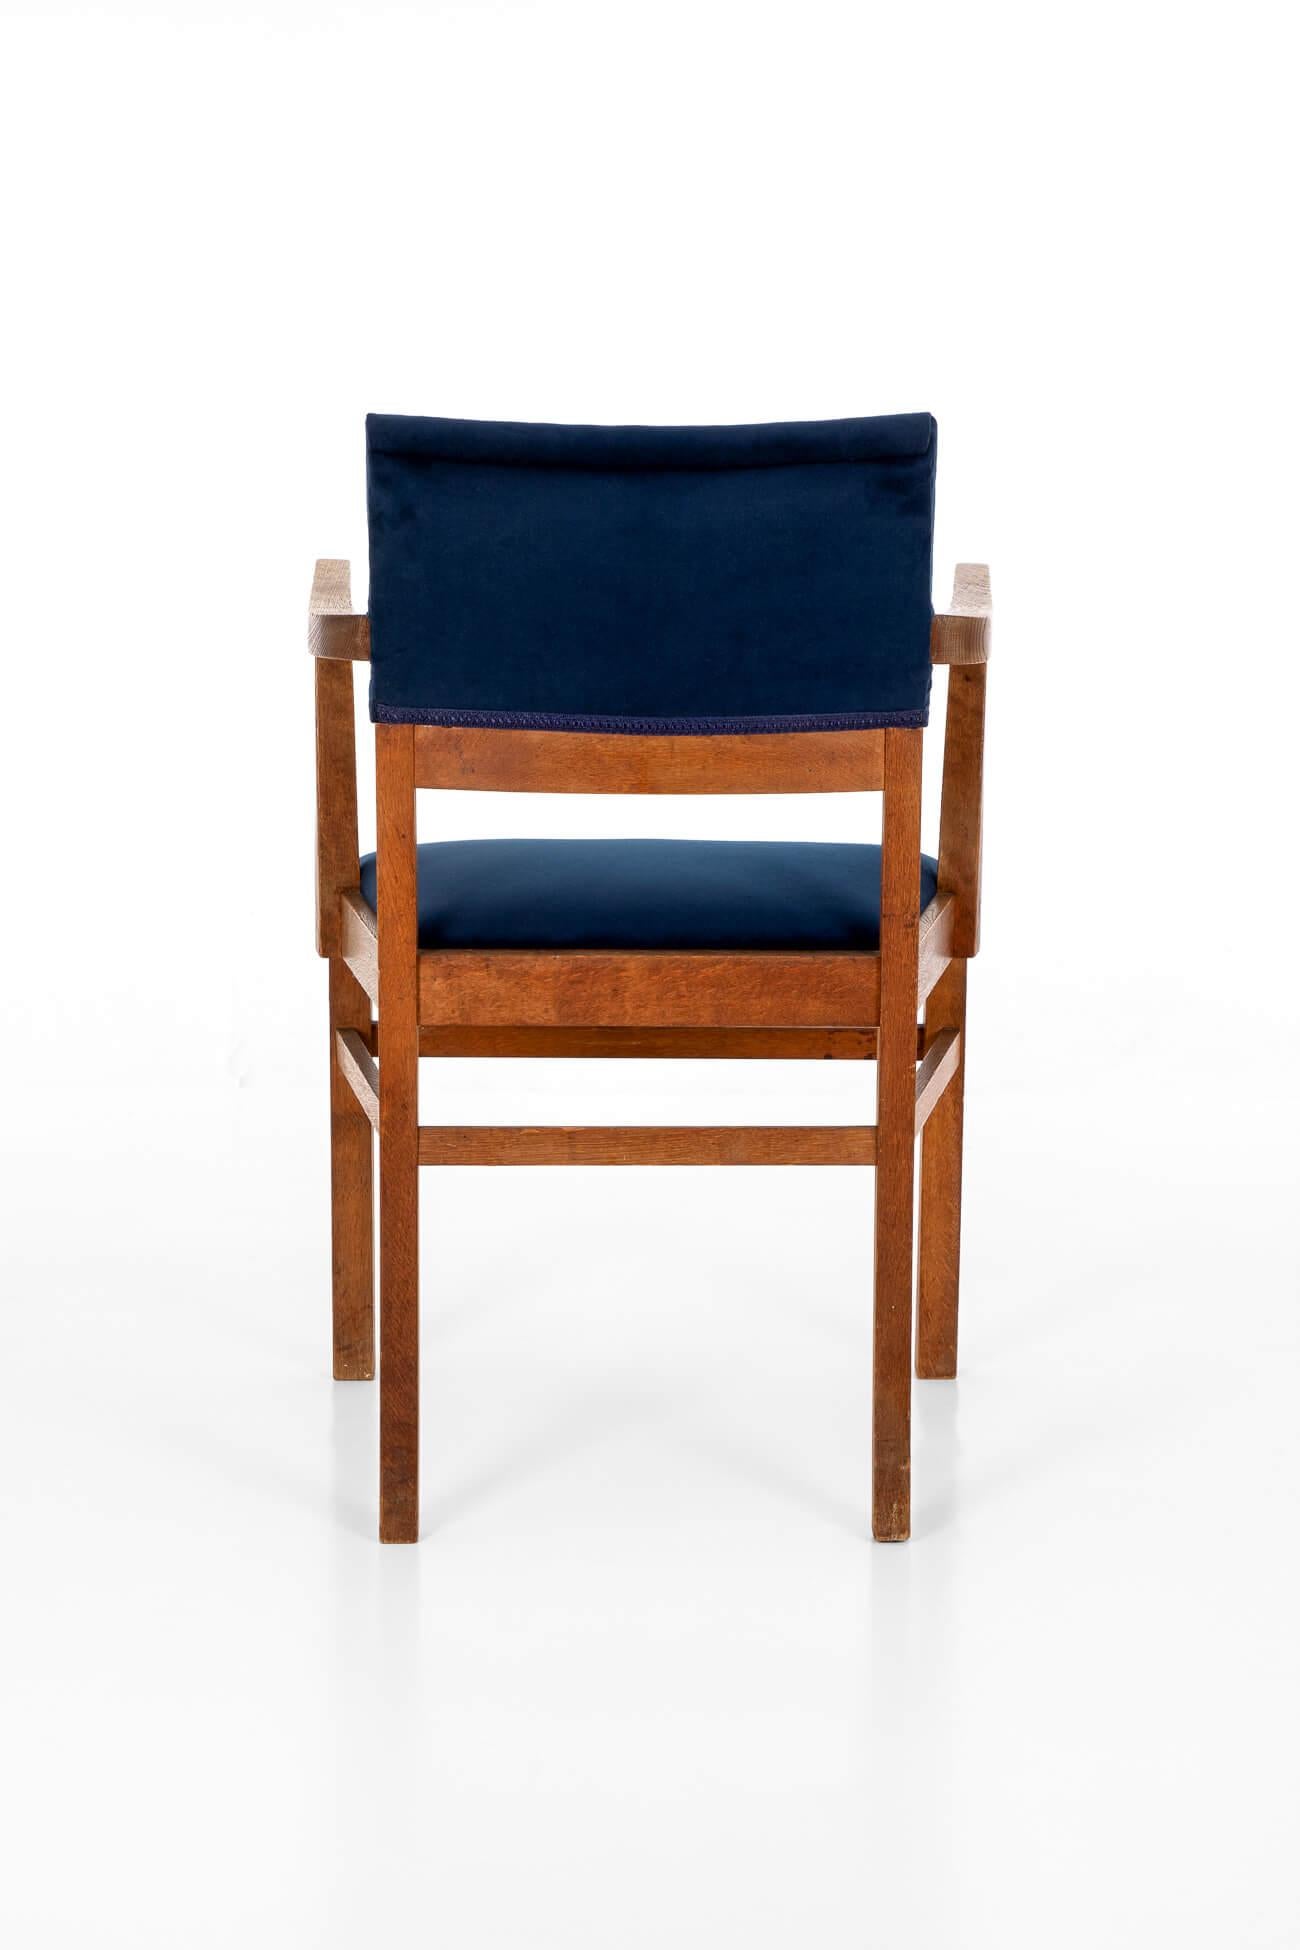 British Heal and Son Elbow Chair For Sale